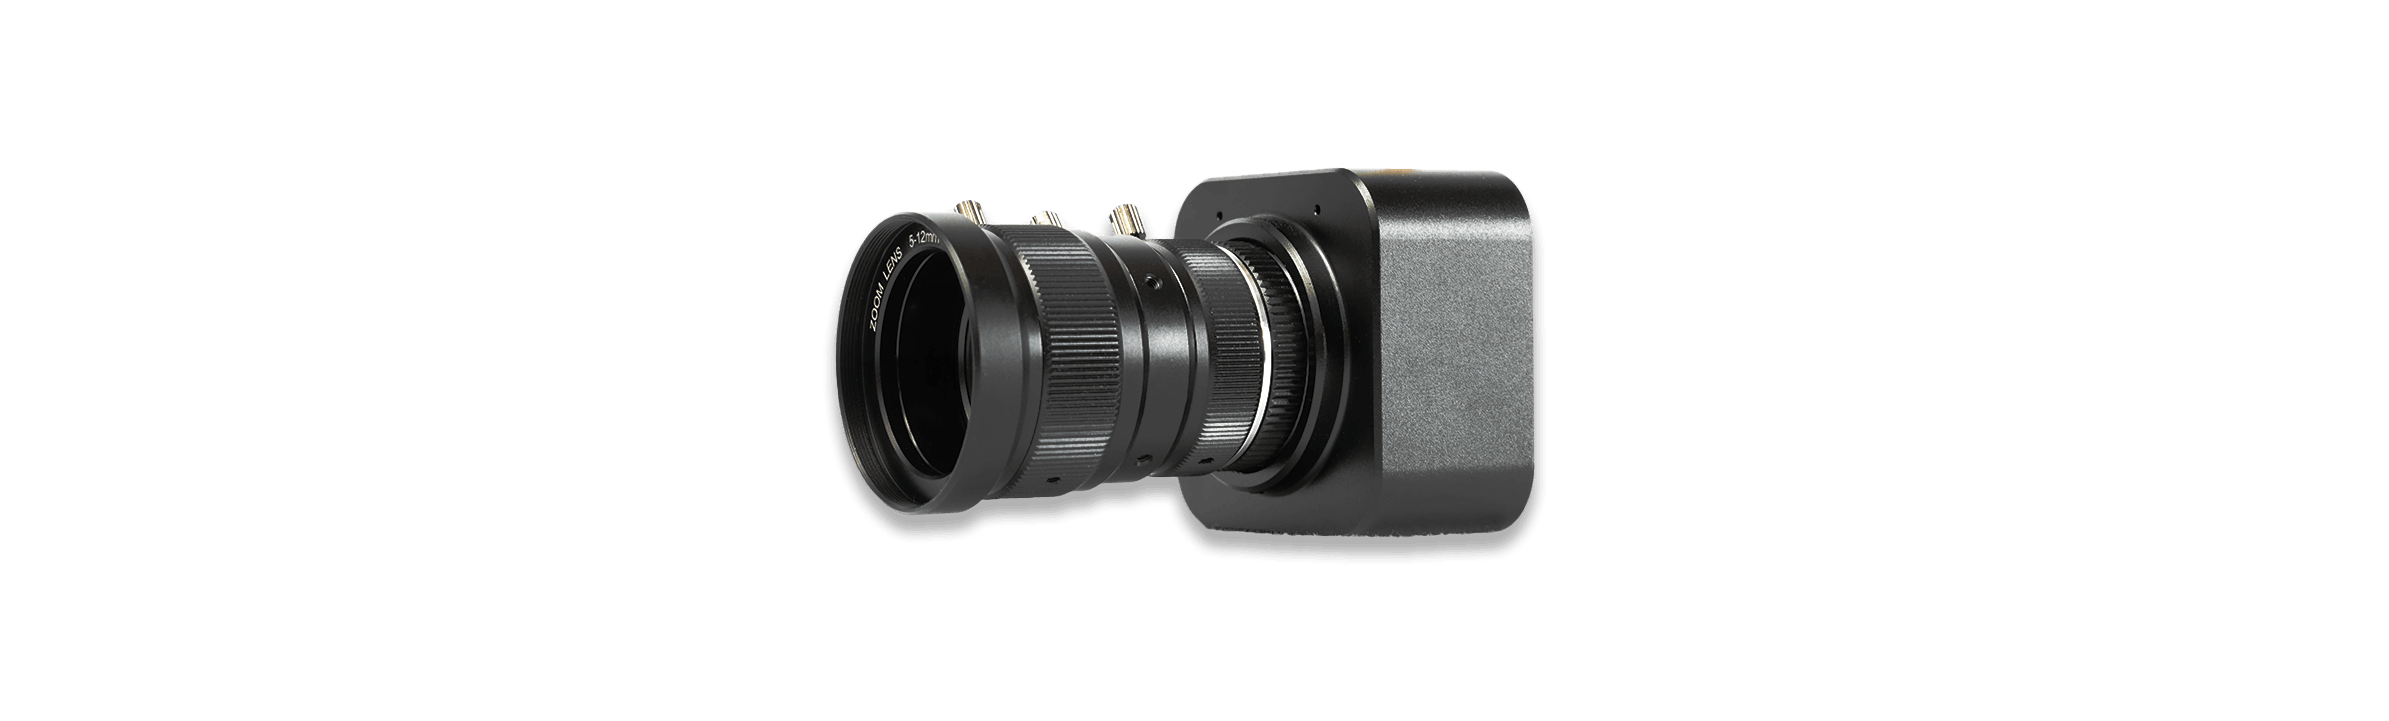 BlackCam 5-12mm zoom camera for BlackBox with no background